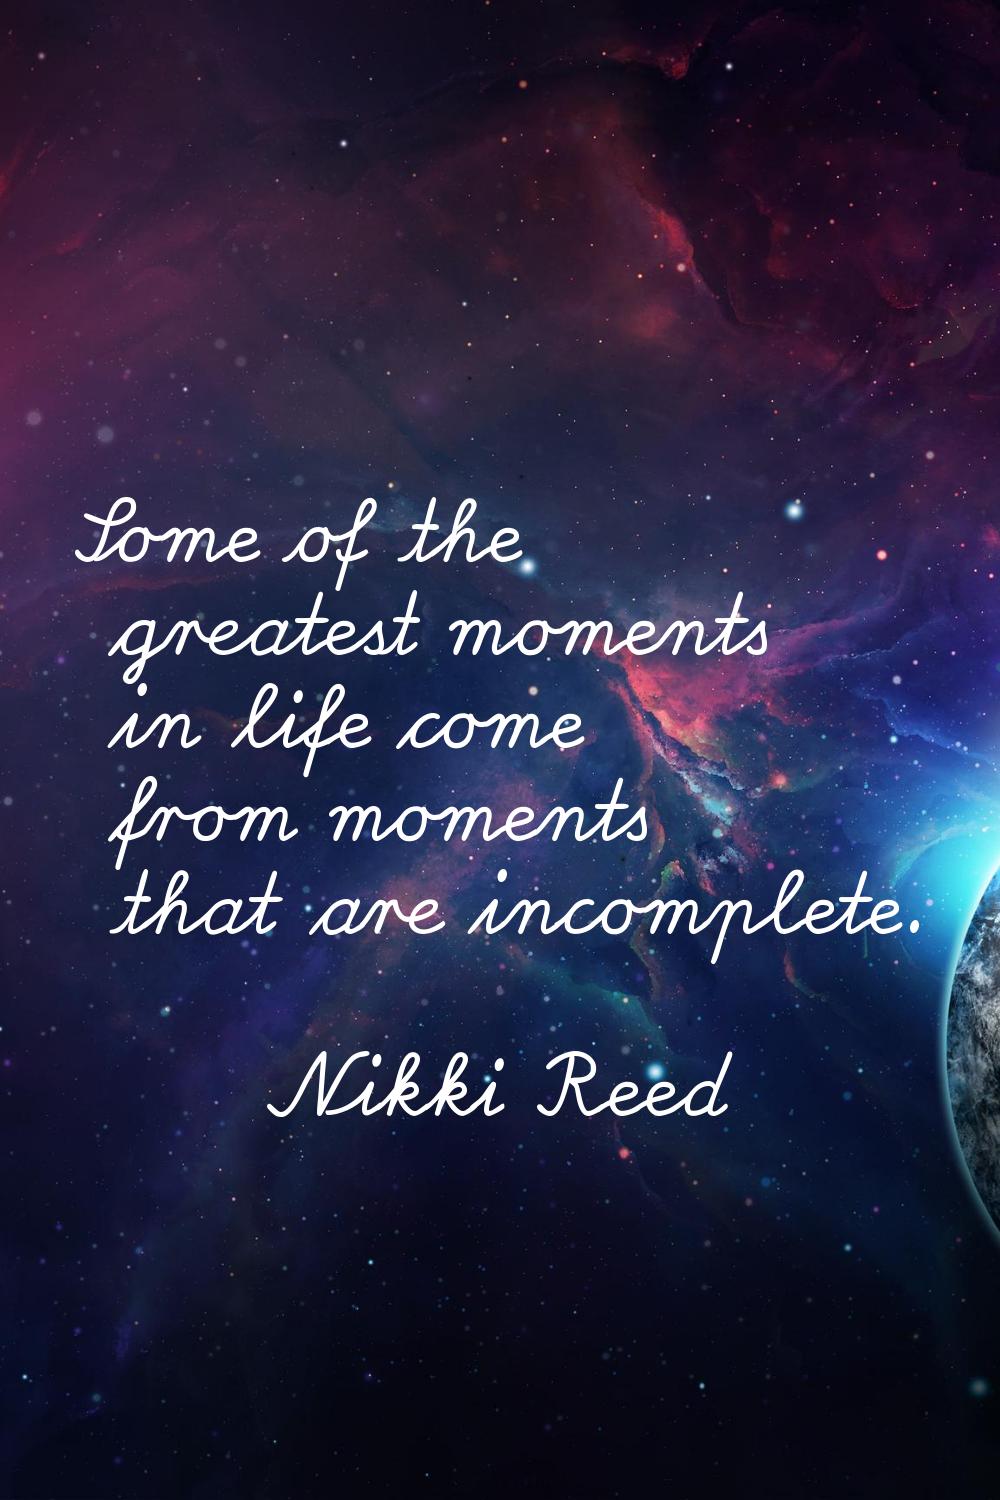 Some of the greatest moments in life come from moments that are incomplete.